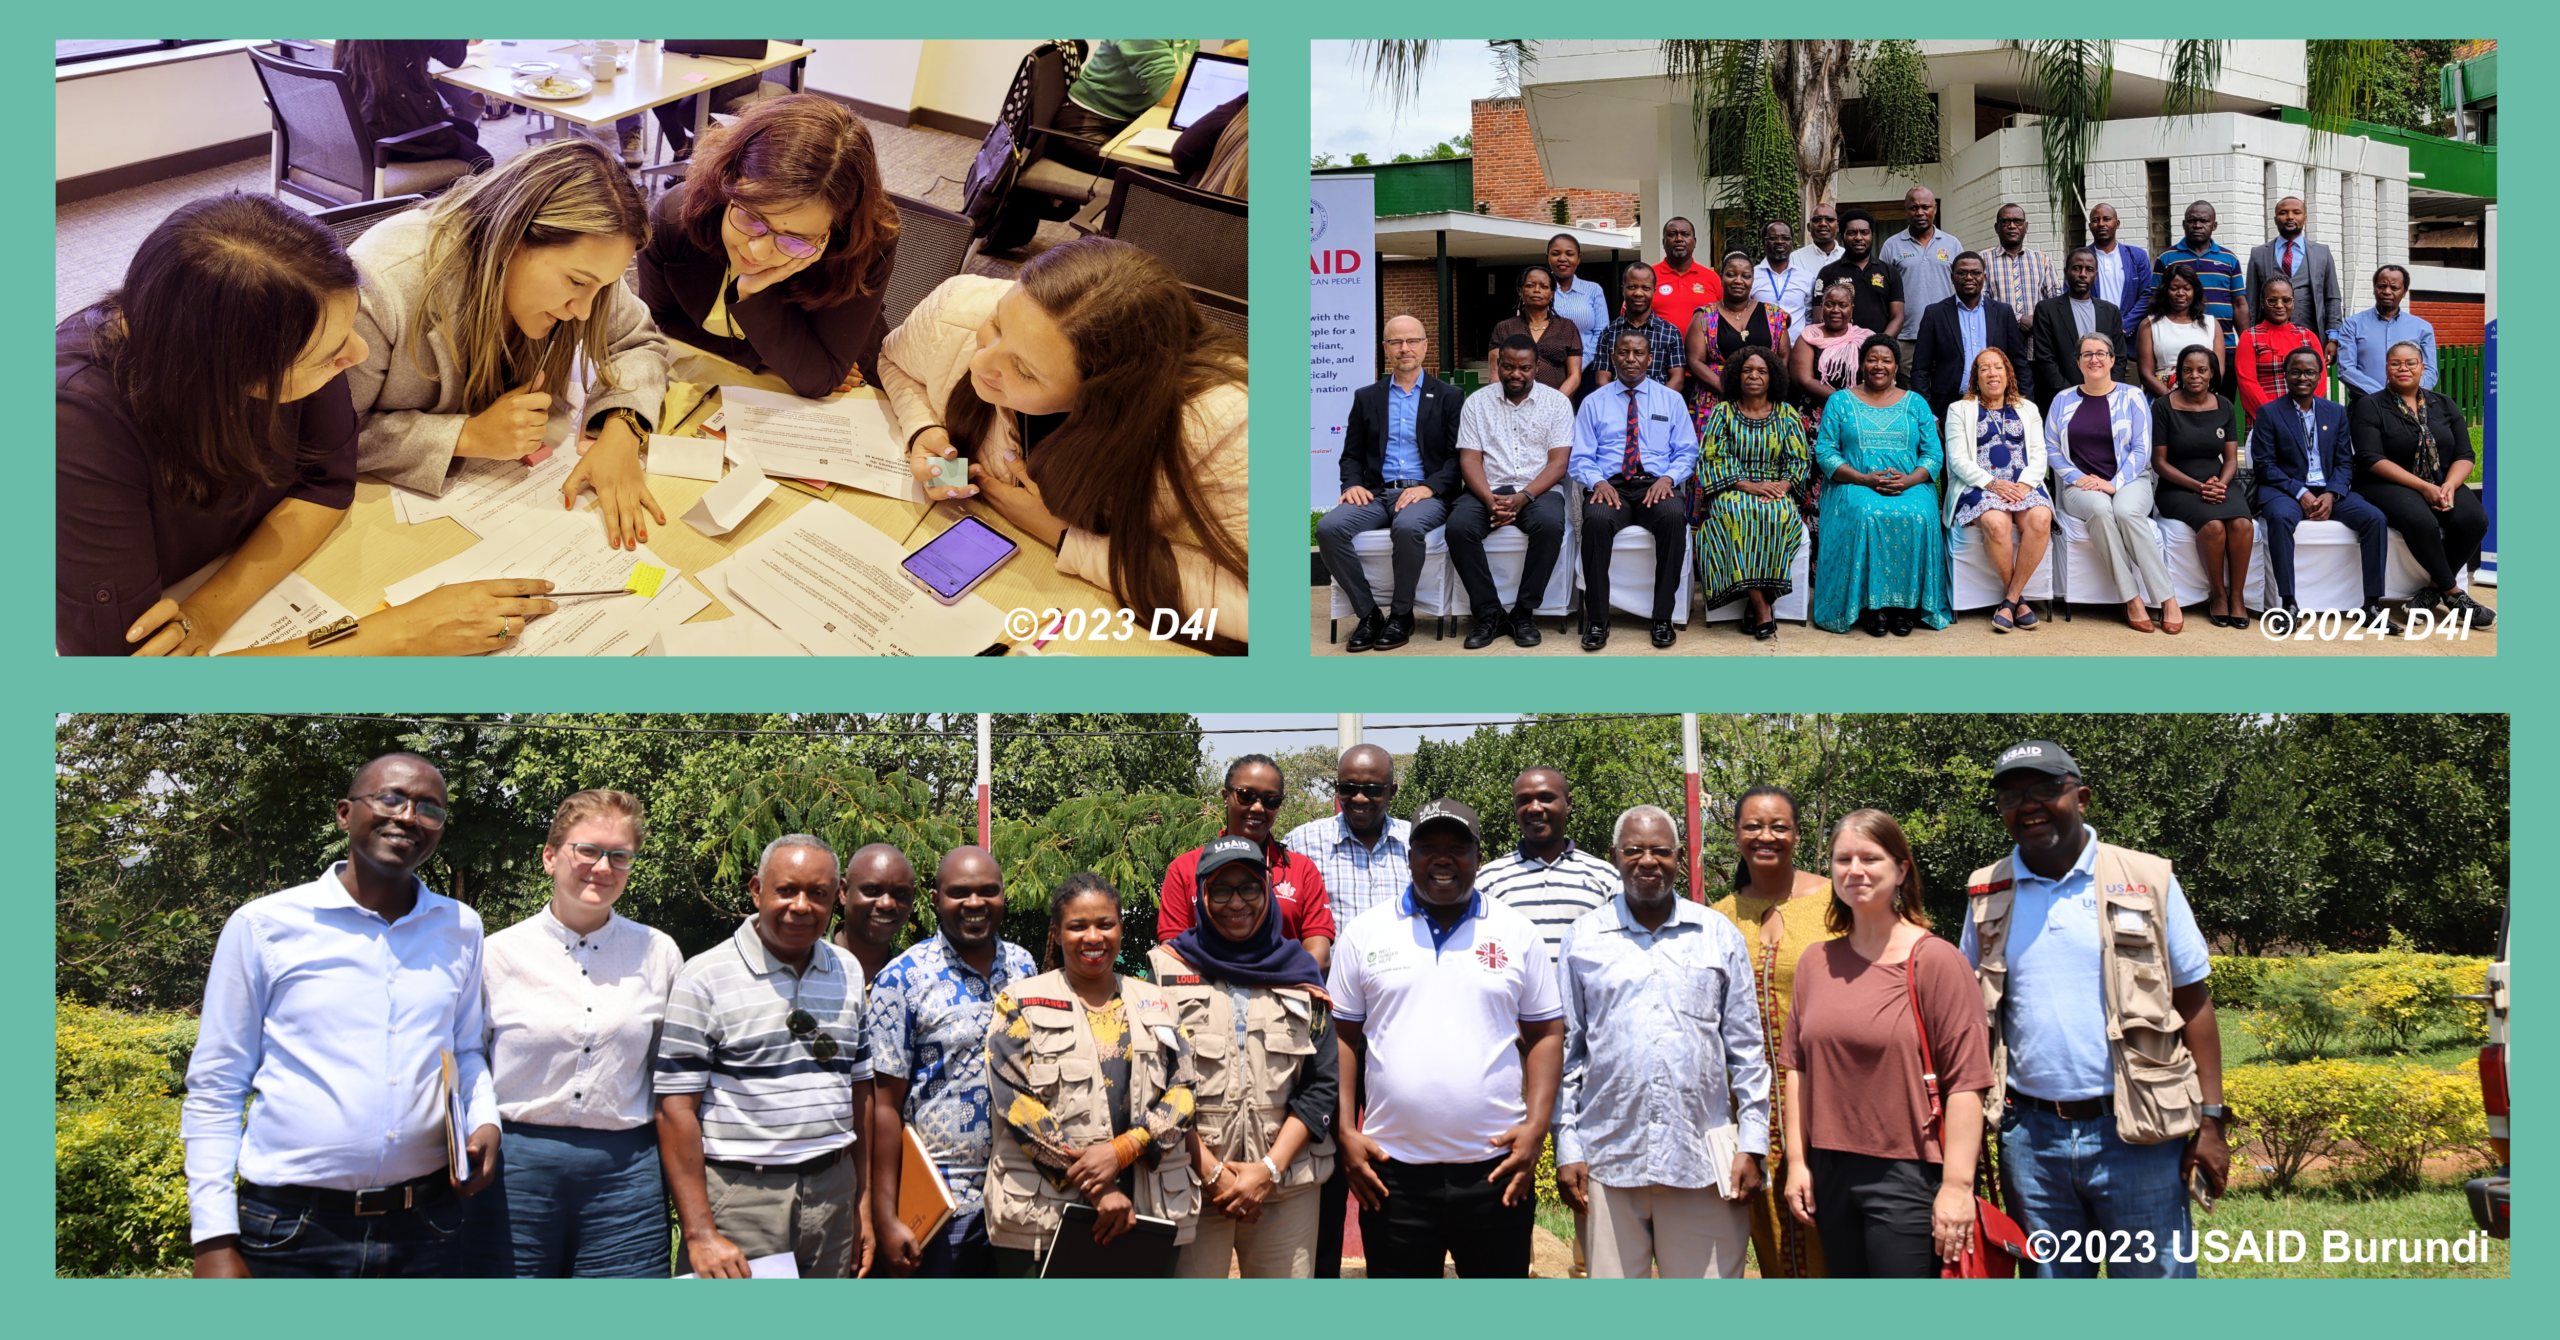 Three photos showing D4I's work in Colombia, Malawi, and Burundi.